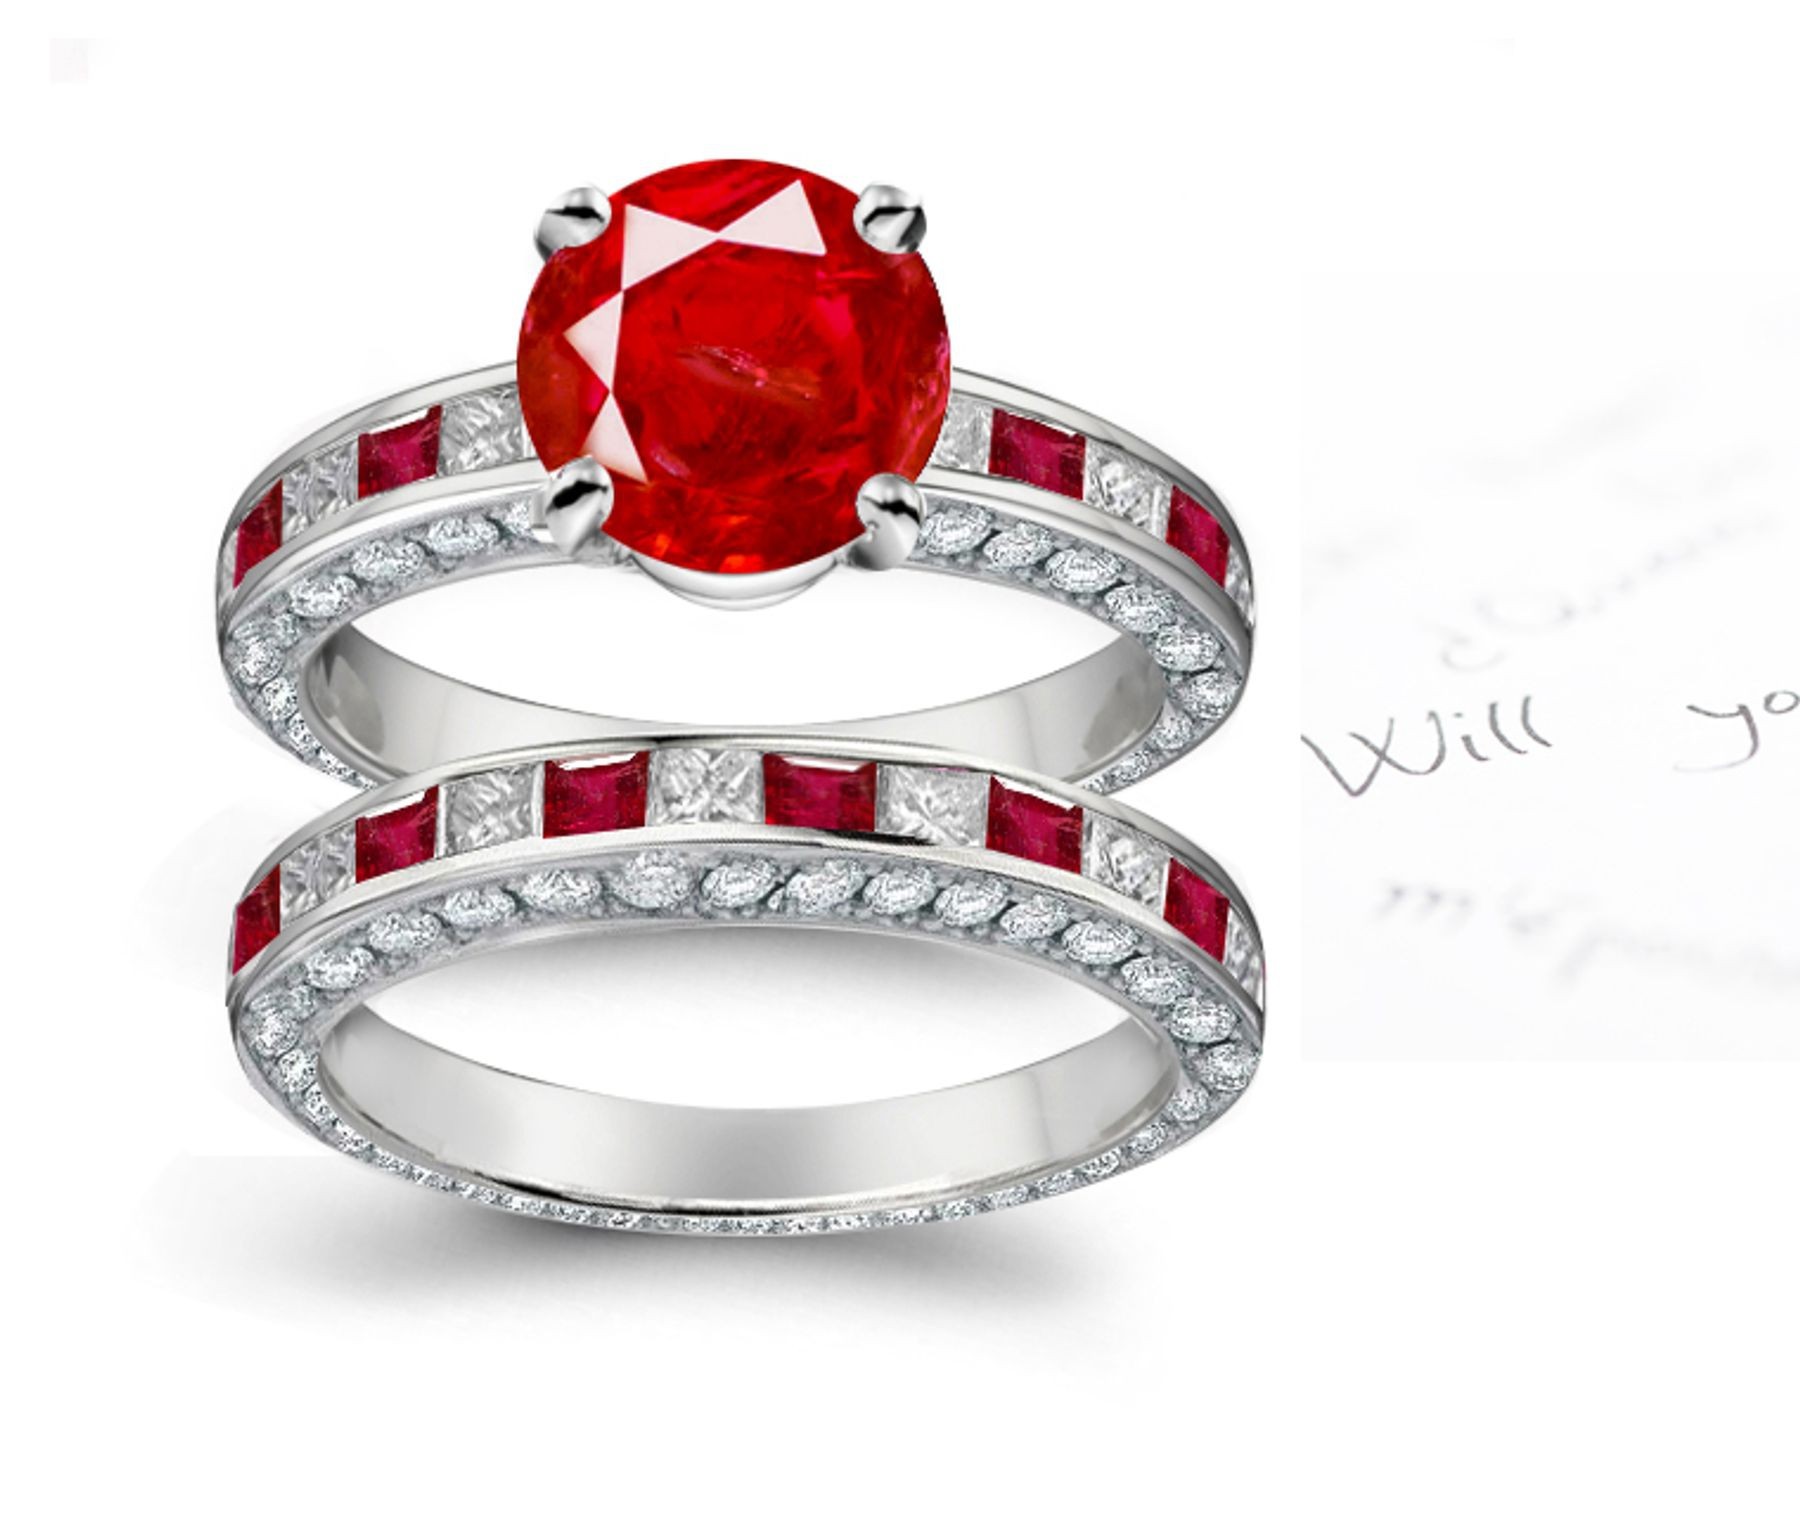 Genuine Hand-Made: Round Ruby & Princess Cut Diamond & Square Ruby Accent Ring & Band Information, Free Shiping 265 Days A Year